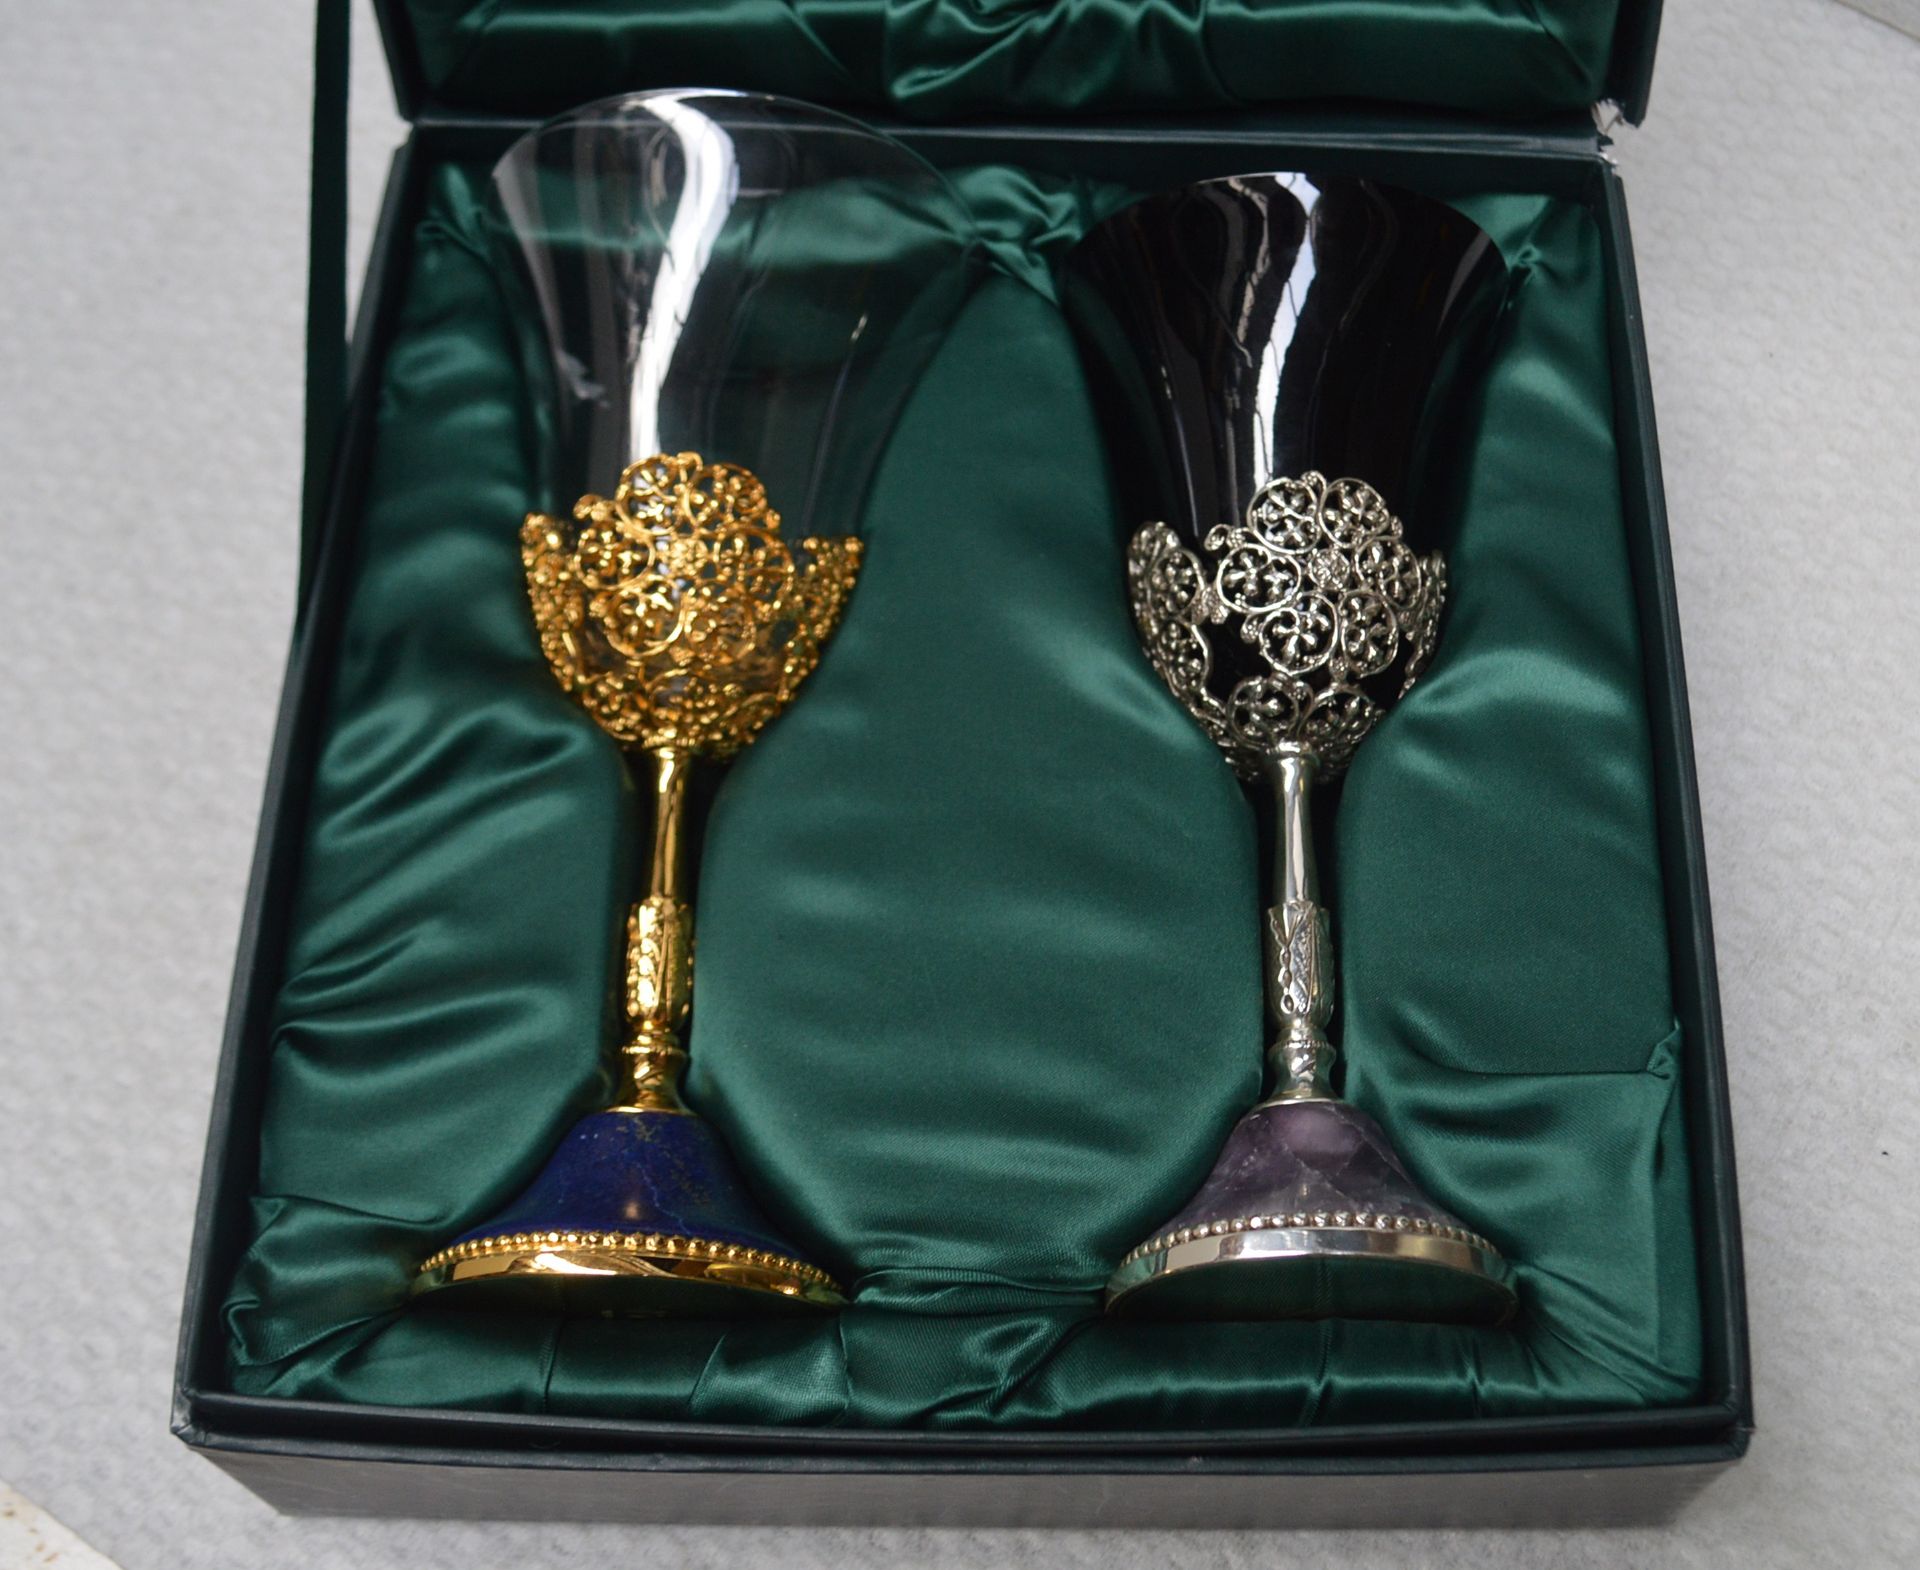 2 x BALDI 'Home Jewels' Italian Hand-crafted Crystal FONTAINEBLEAU Water Goblets - RRP £1,289 - Image 2 of 4